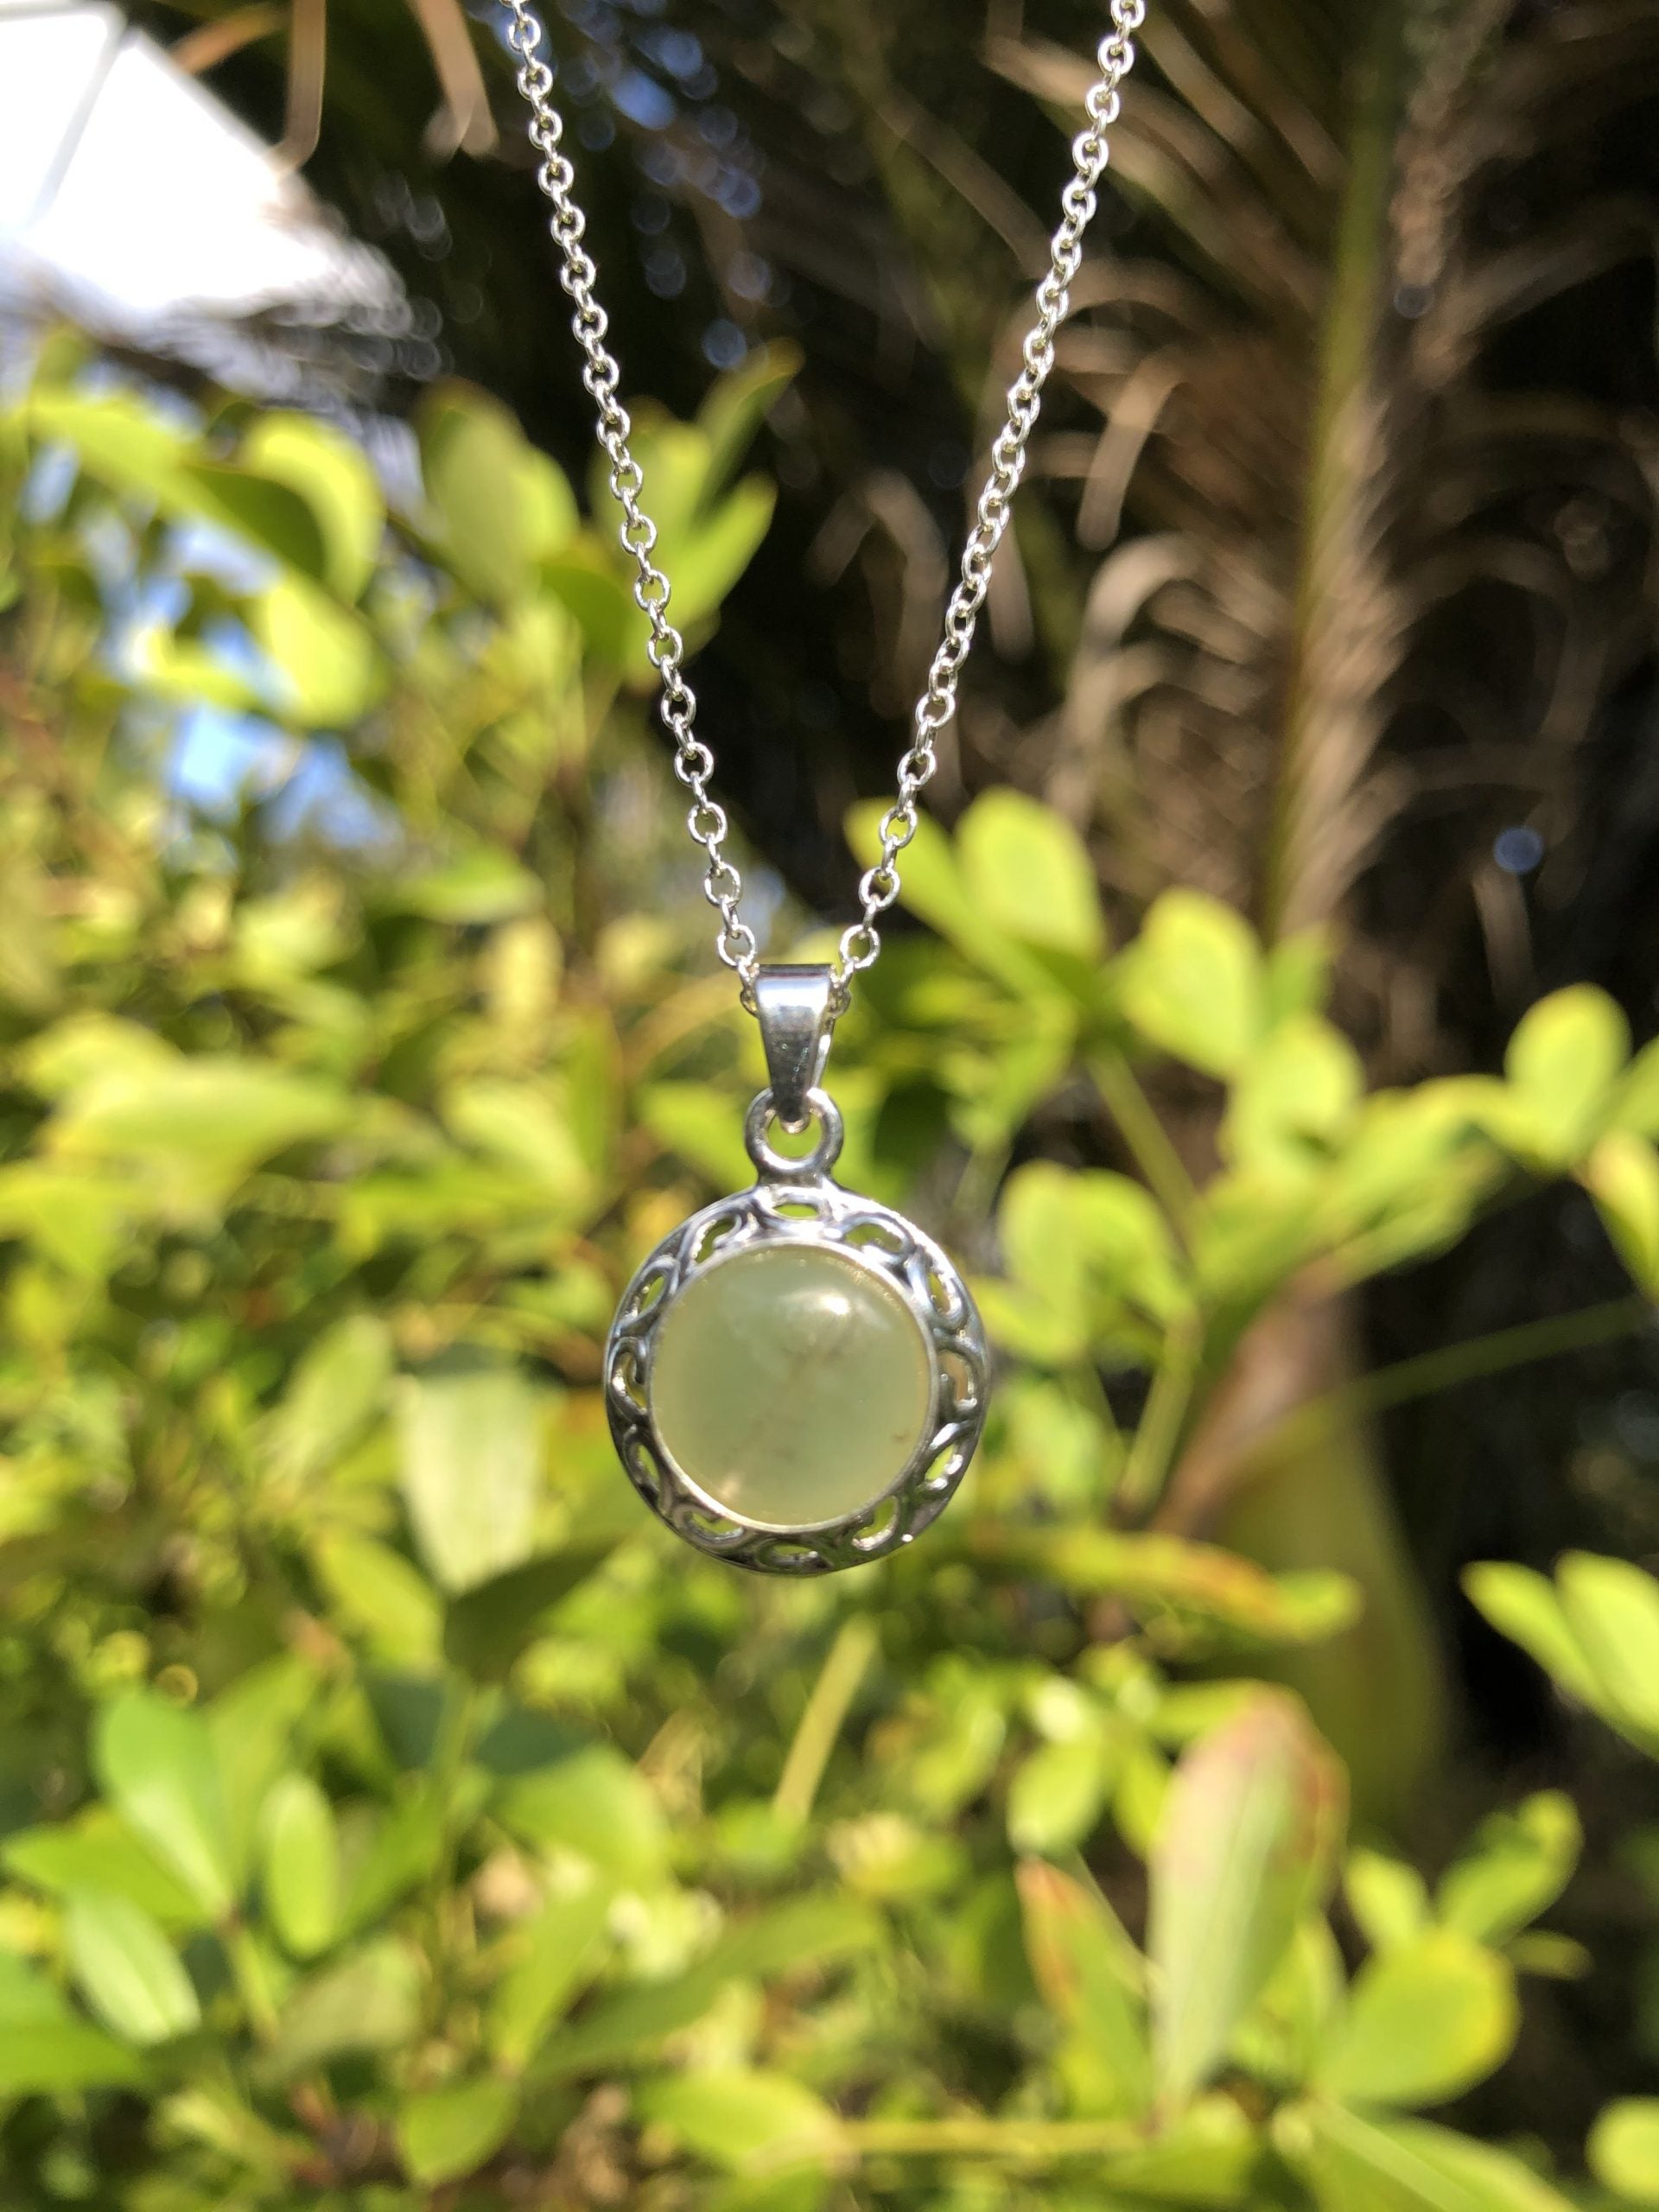 Necklace with Botswana Jade (green aventurine), hand polished to a 20mm round cabochon and set in a silver plated setting with 19 inch chain.